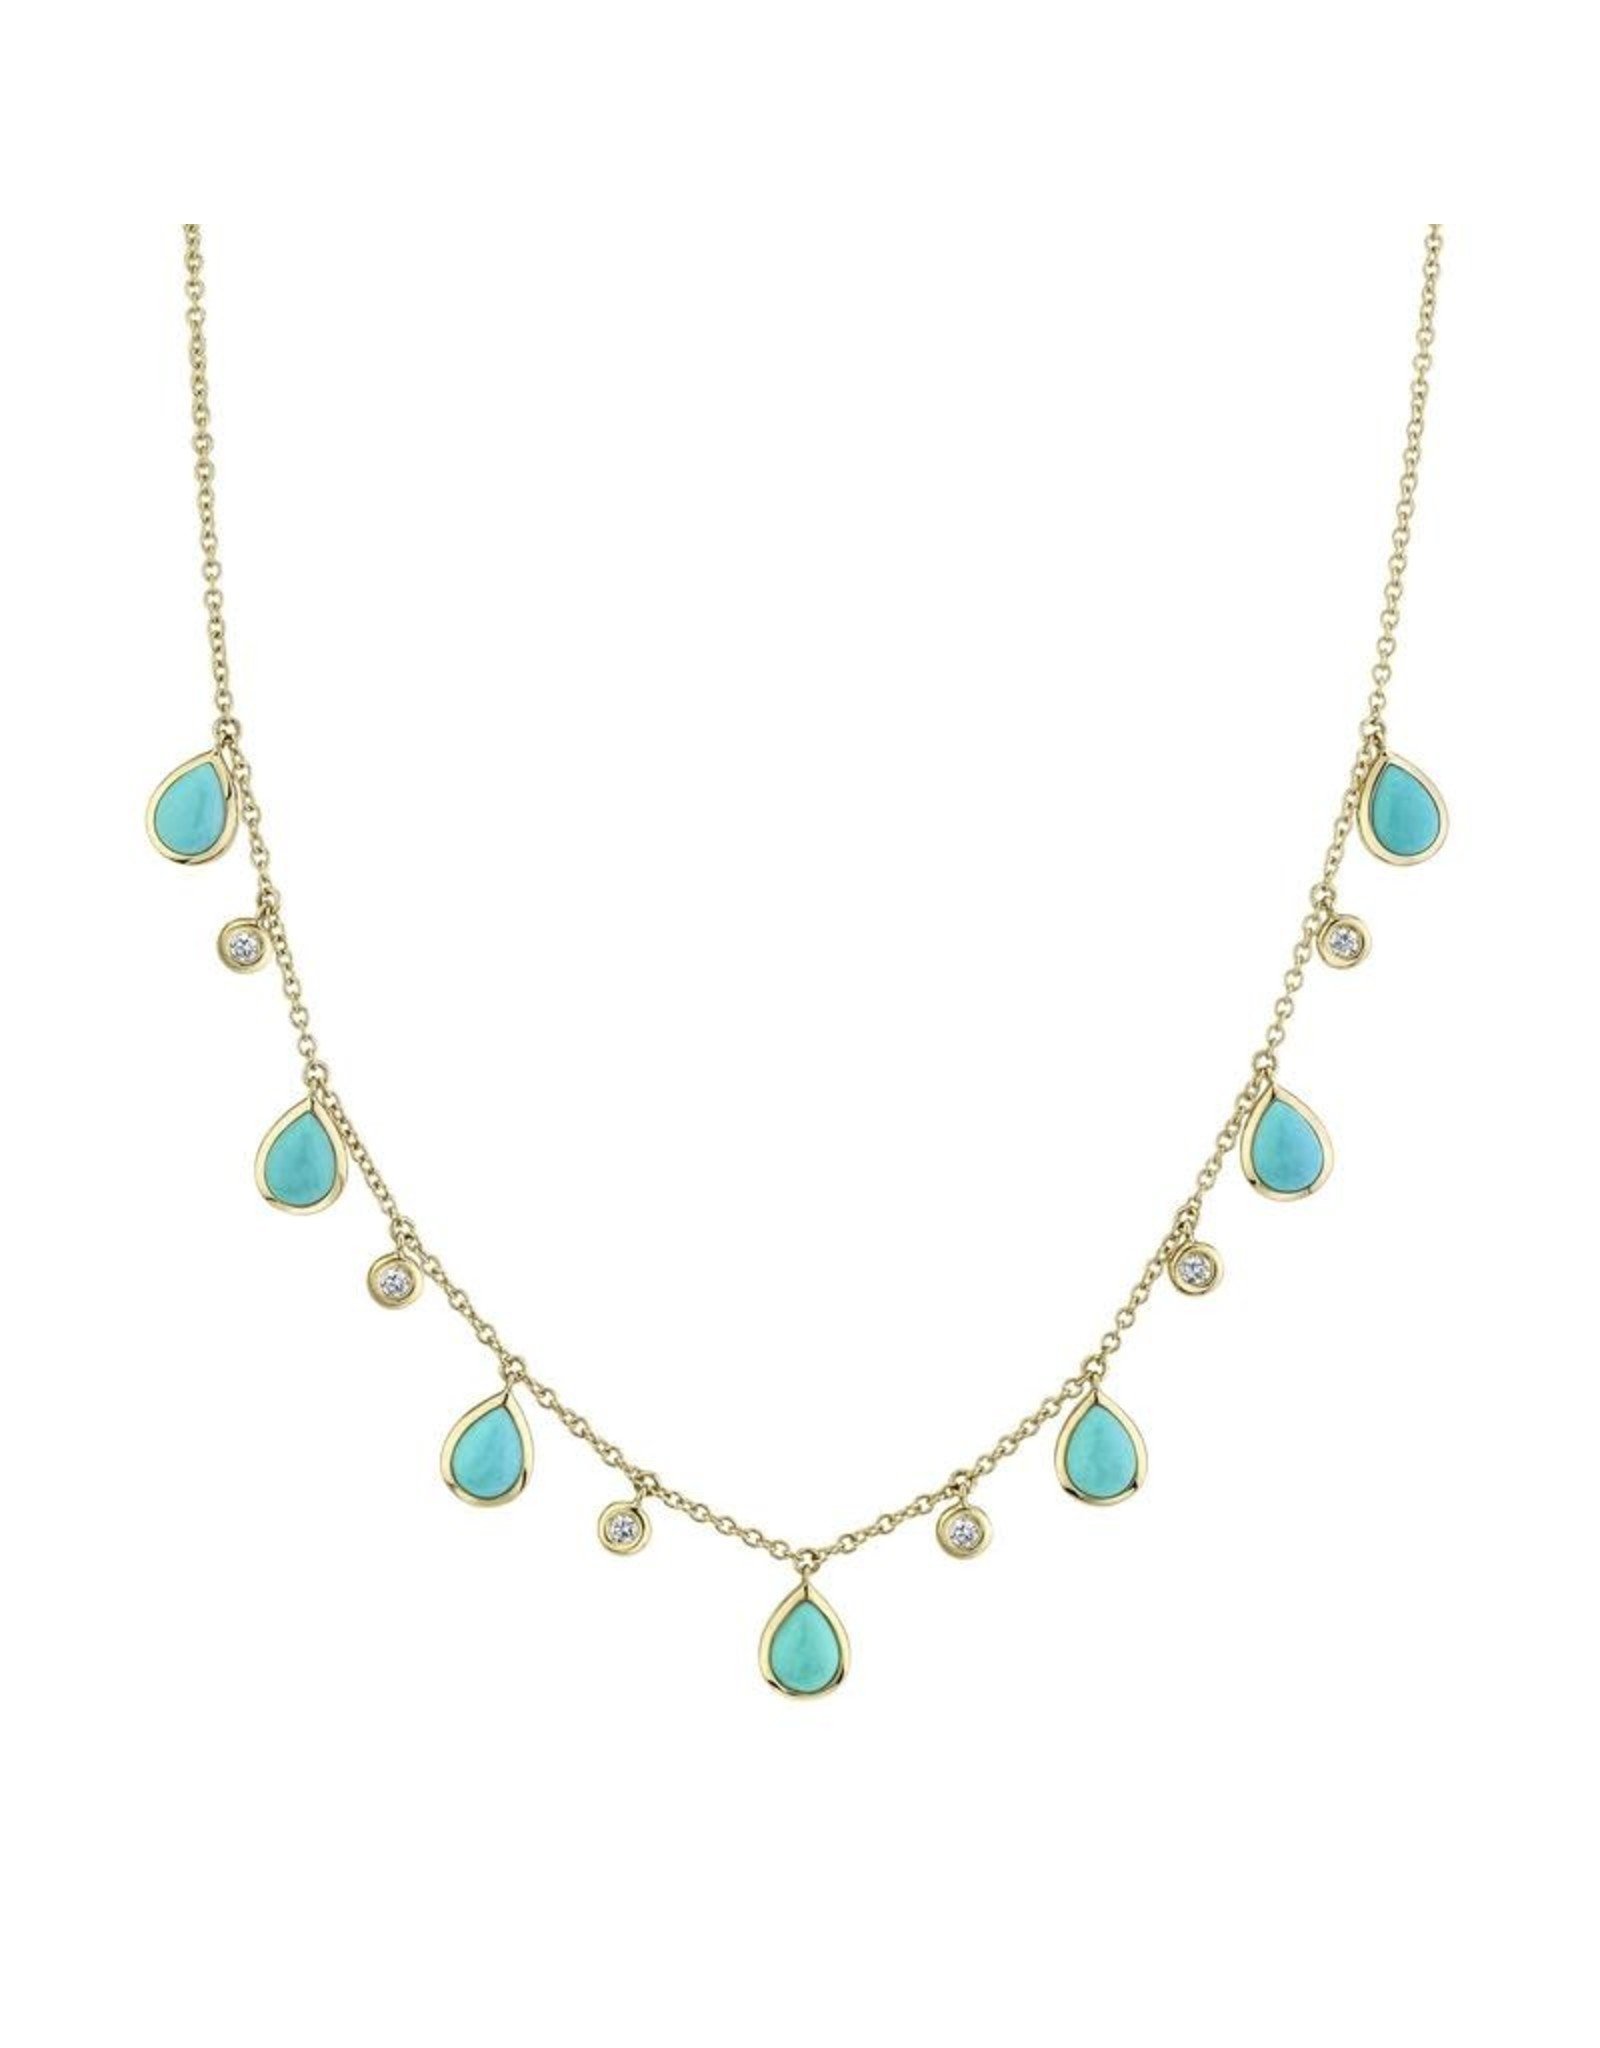 14K Yellow Gold Turquoise and Diamond Dangle Necklace, T: 5.49ct, D: 0.25ct